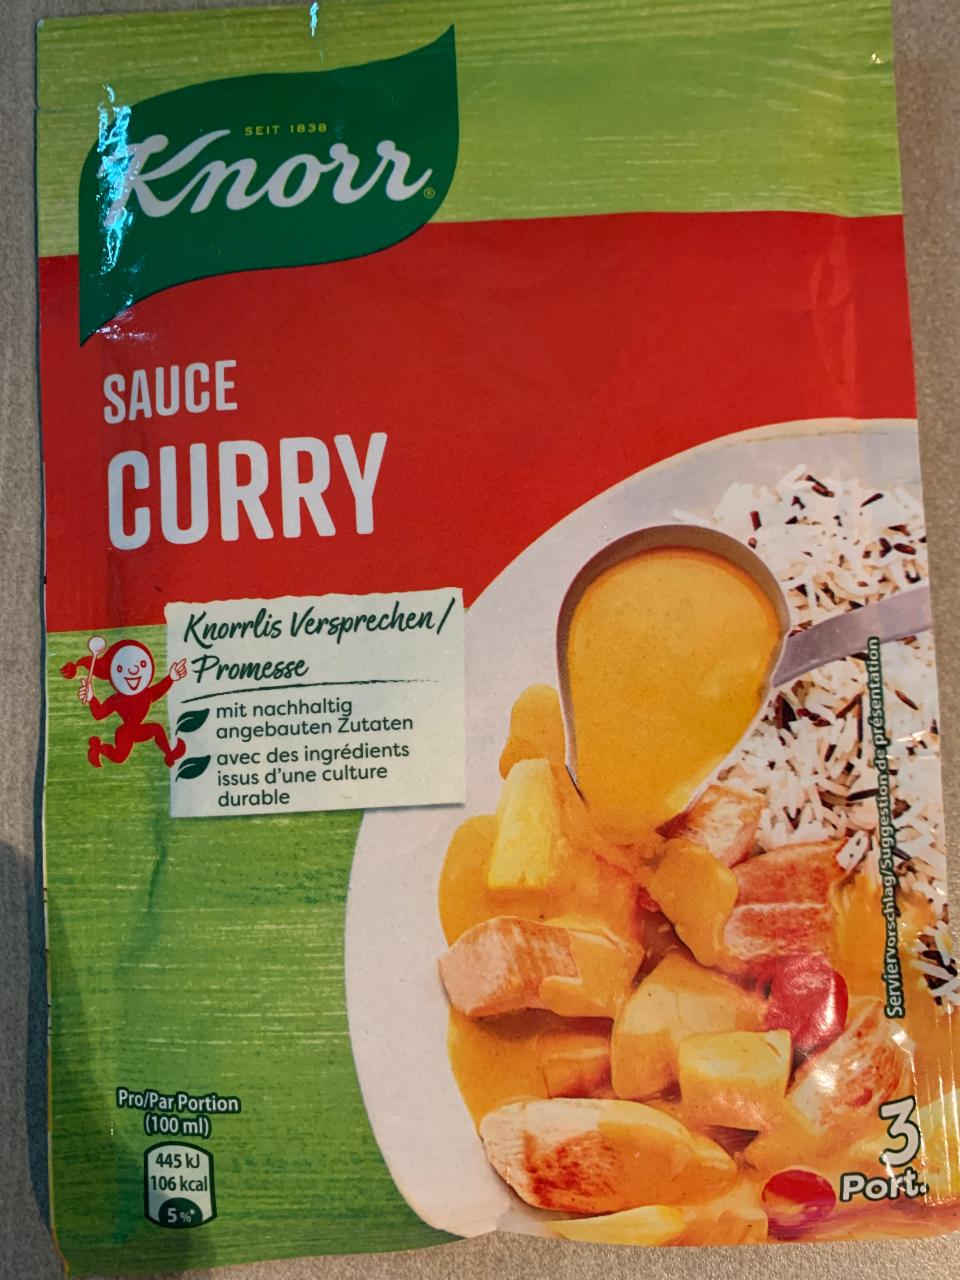 Fotografie - Sauce Curry Knorr